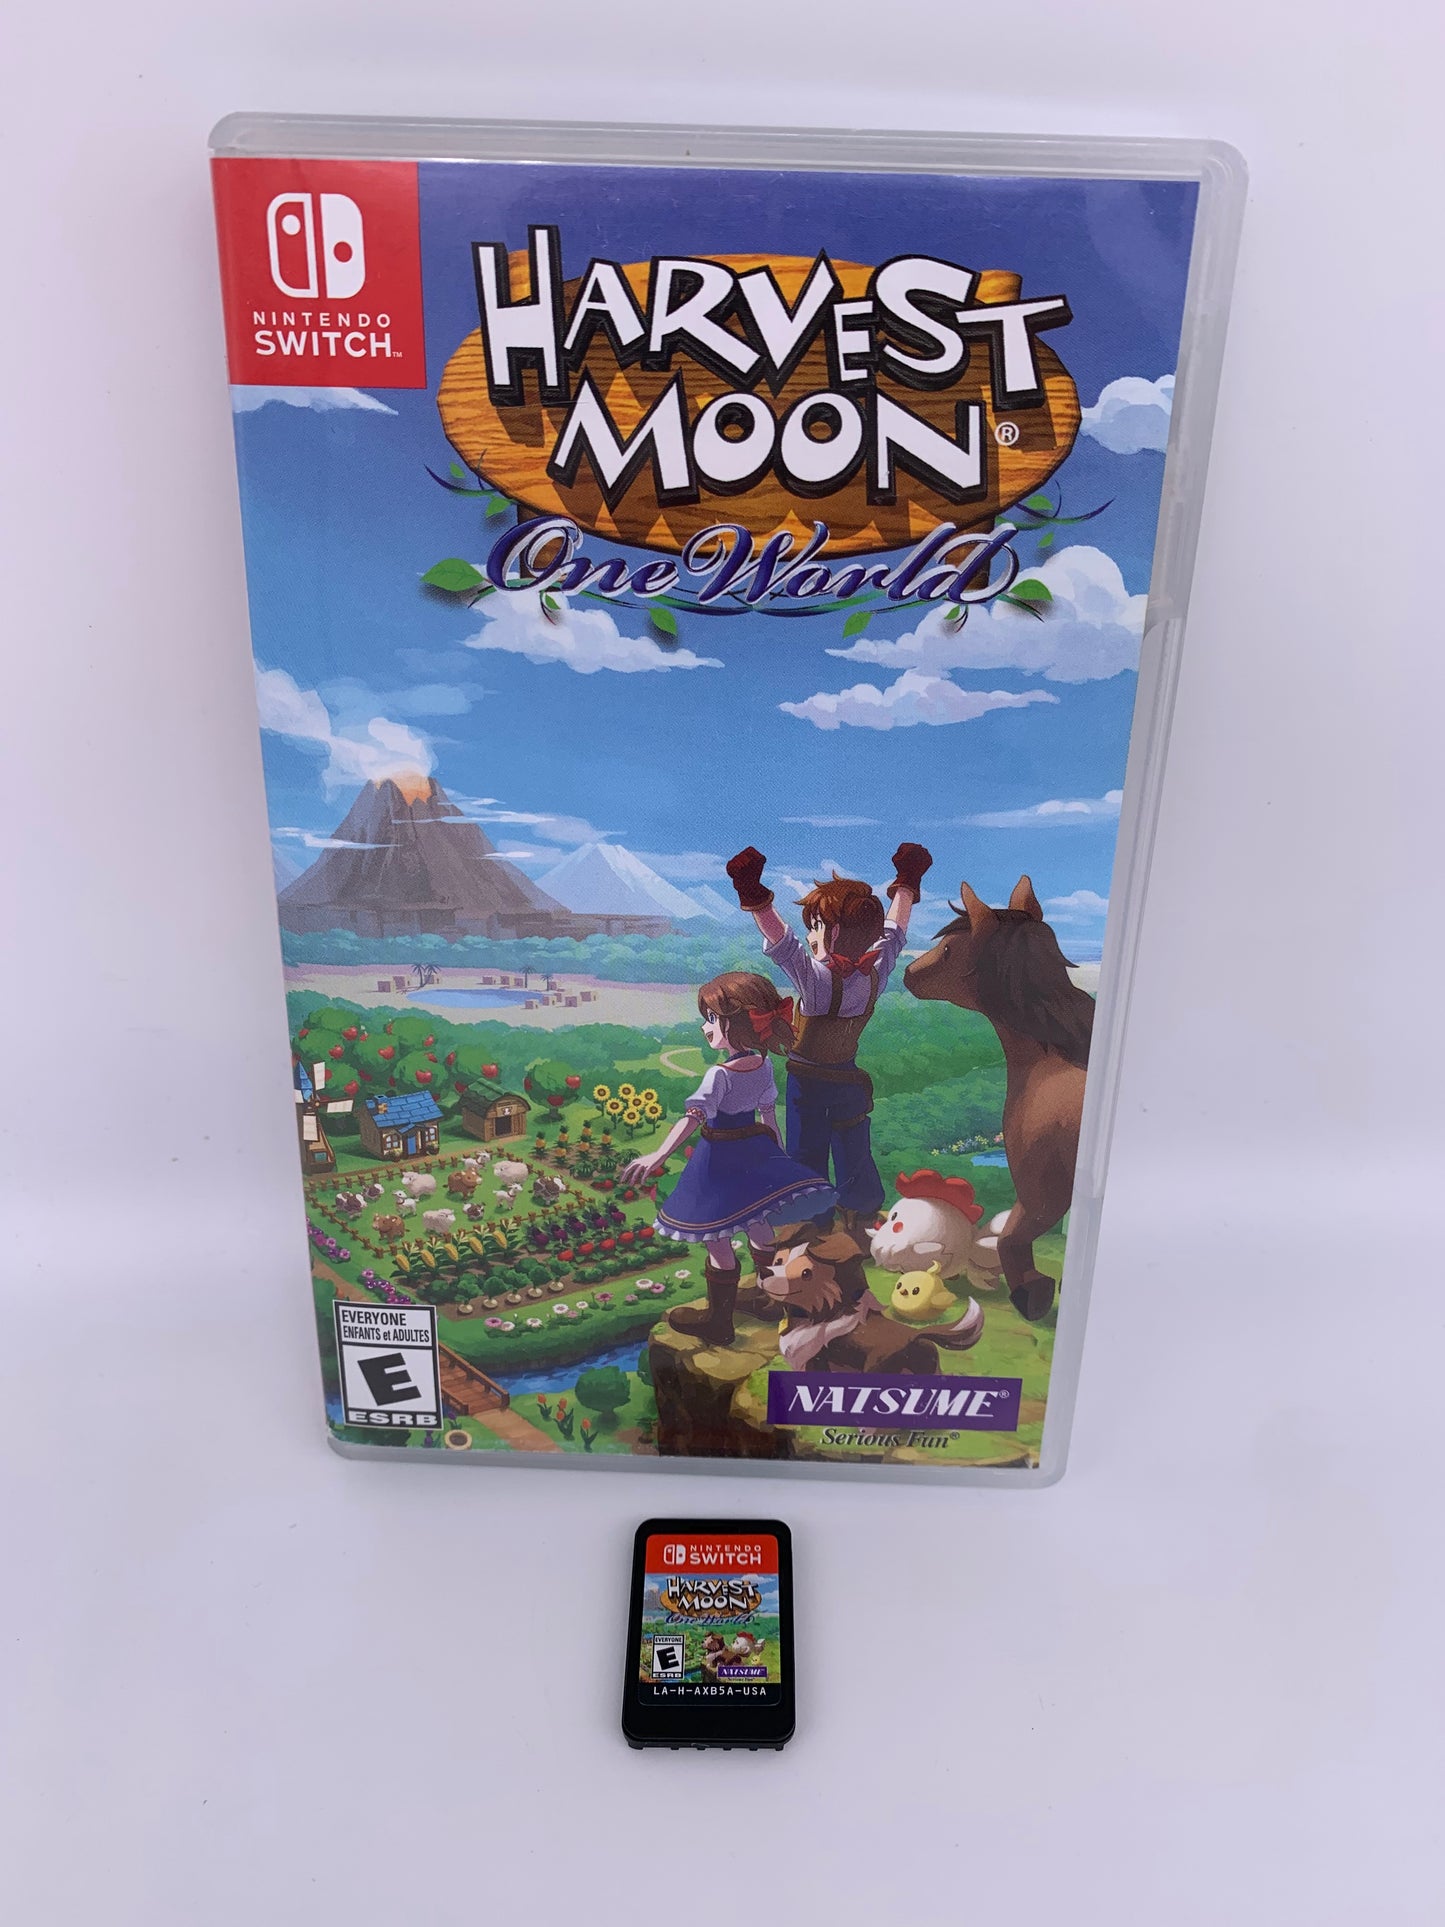 PiXEL-RETRO.COM : NINTENDO SWITCH COMPLETE IN BOX MANUAL GAME NTSC HARVEST MOON ONE WORLD